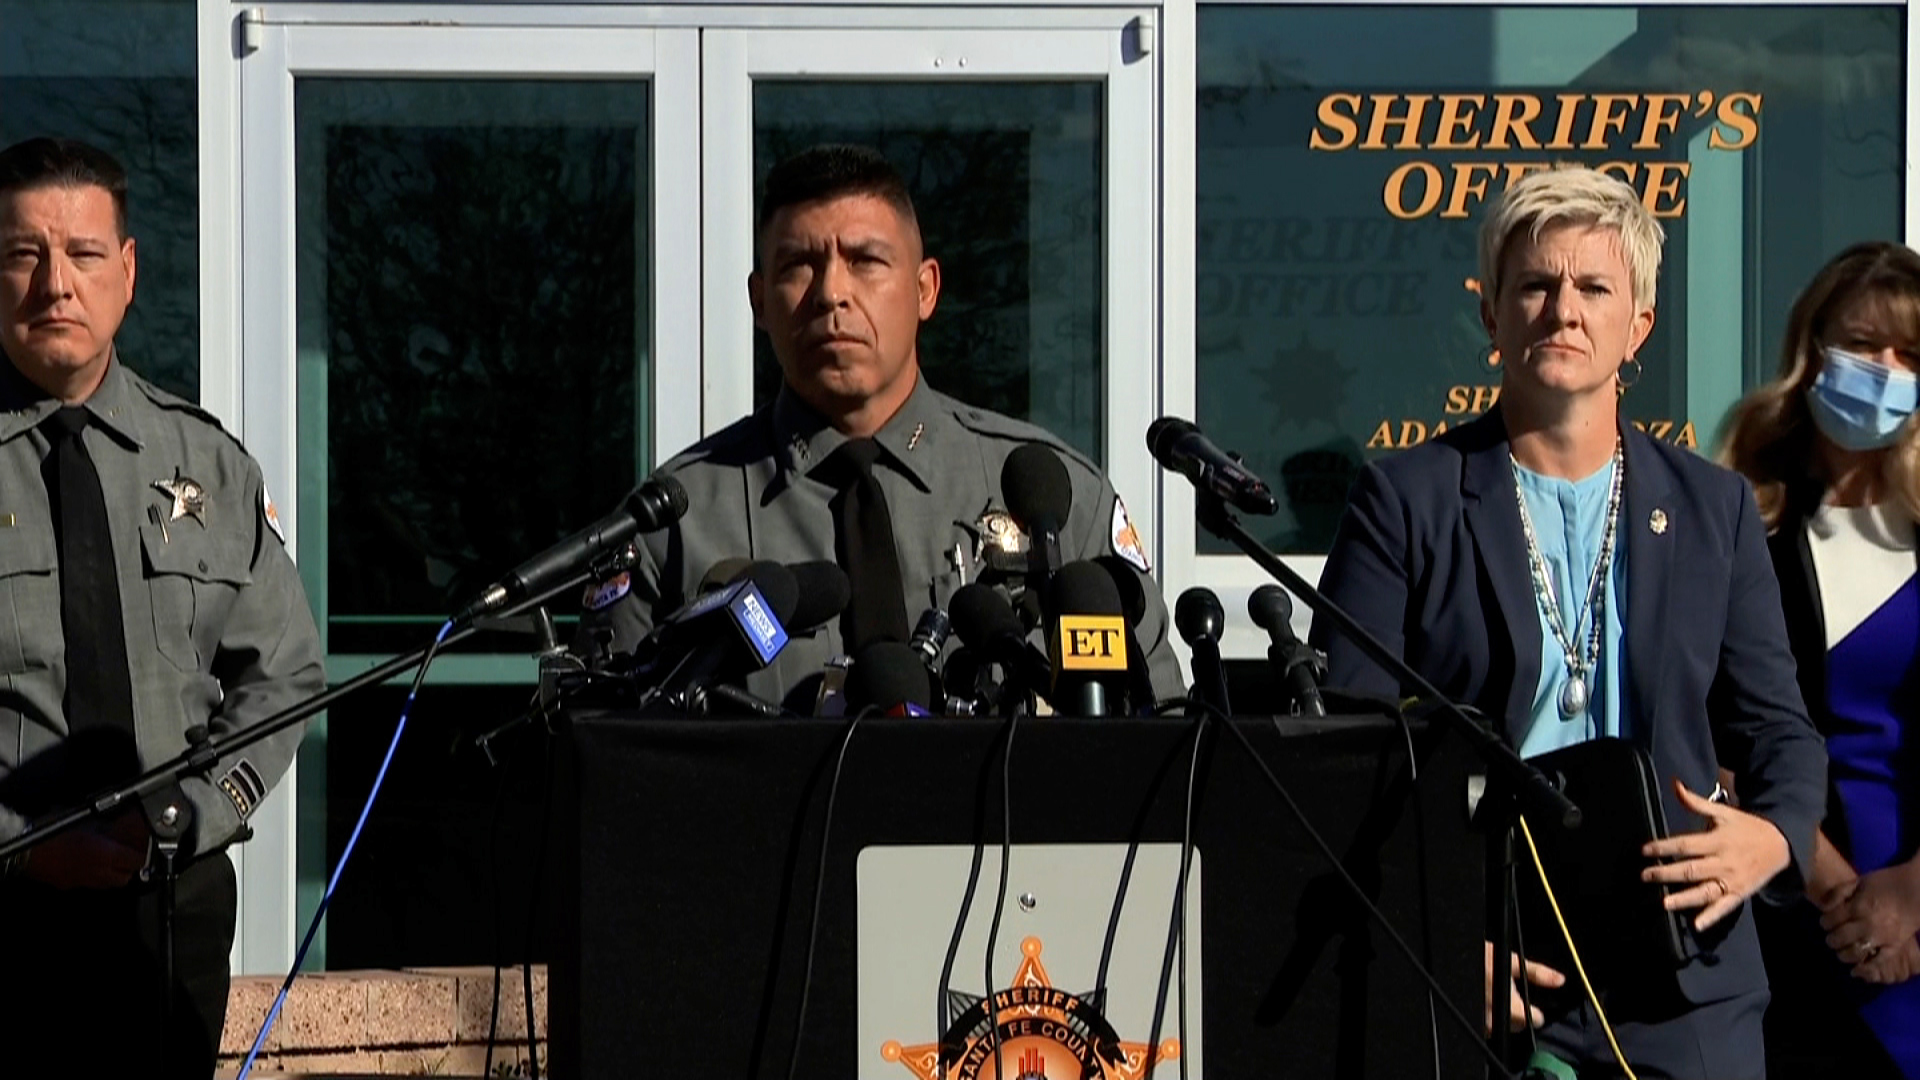 Sheriff says “we suspect there were other live rounds” on the movie set